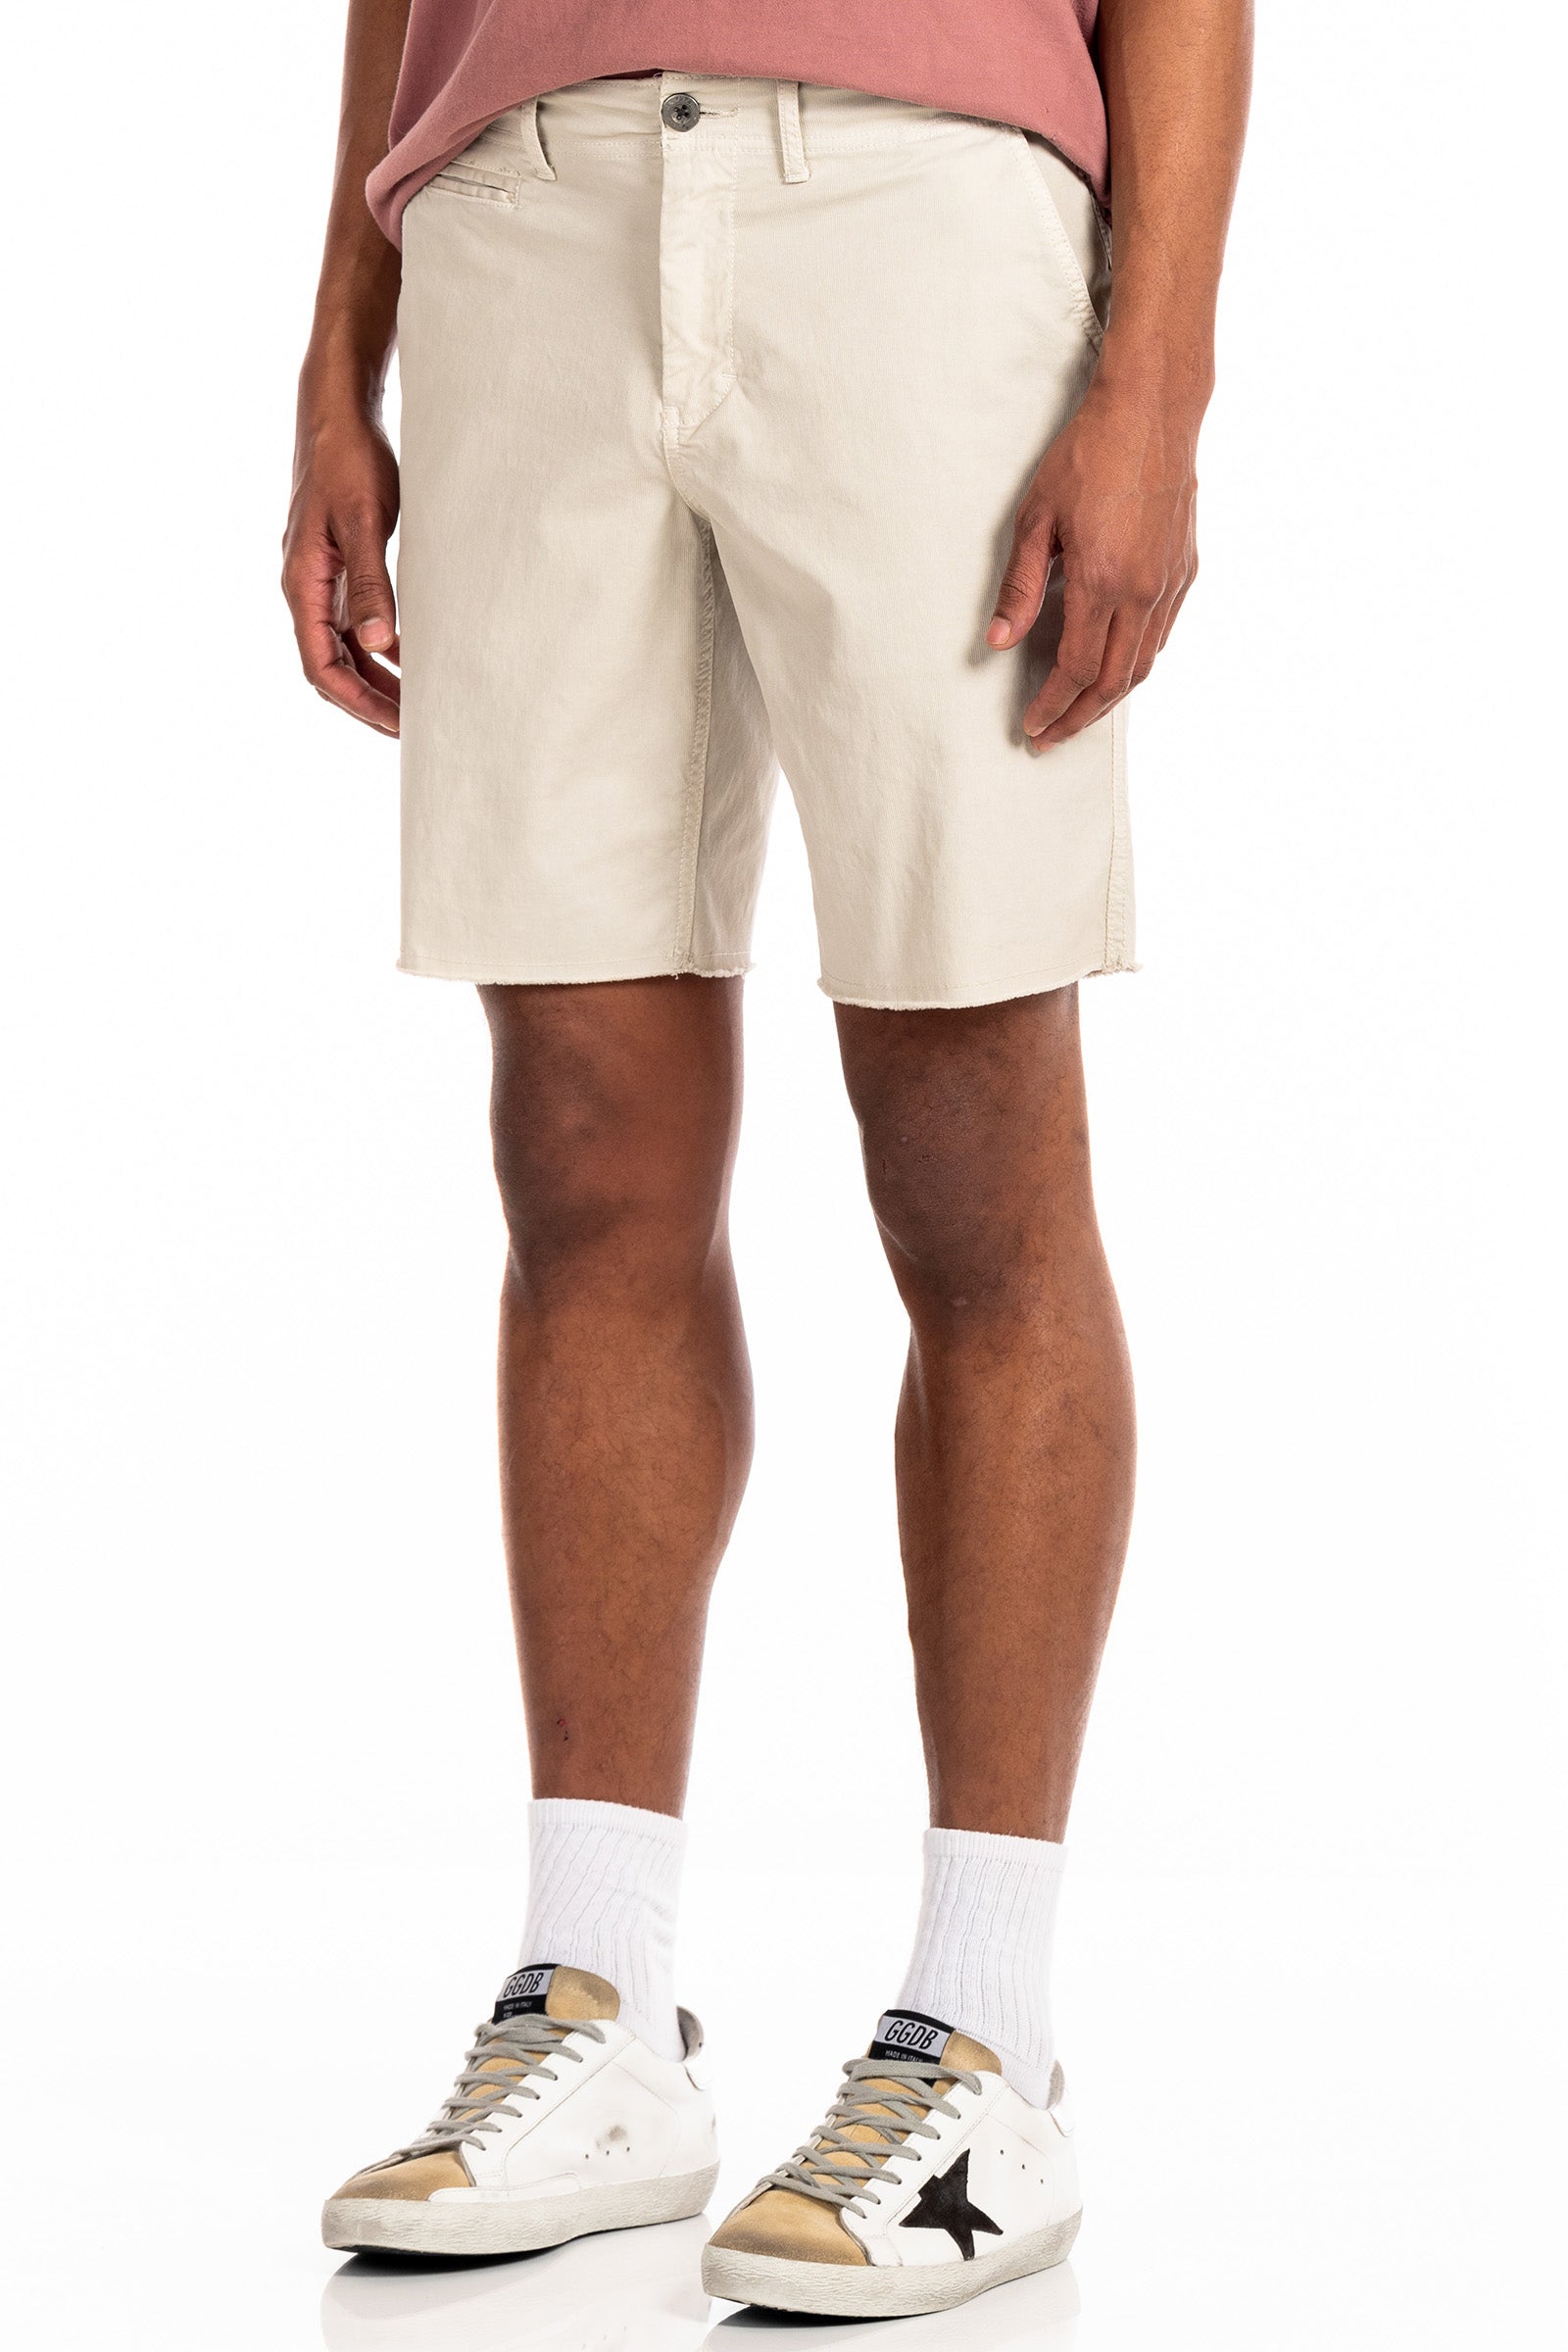 Original Paperbacks Brentwood Chino Short in String on Model Cropped Side View